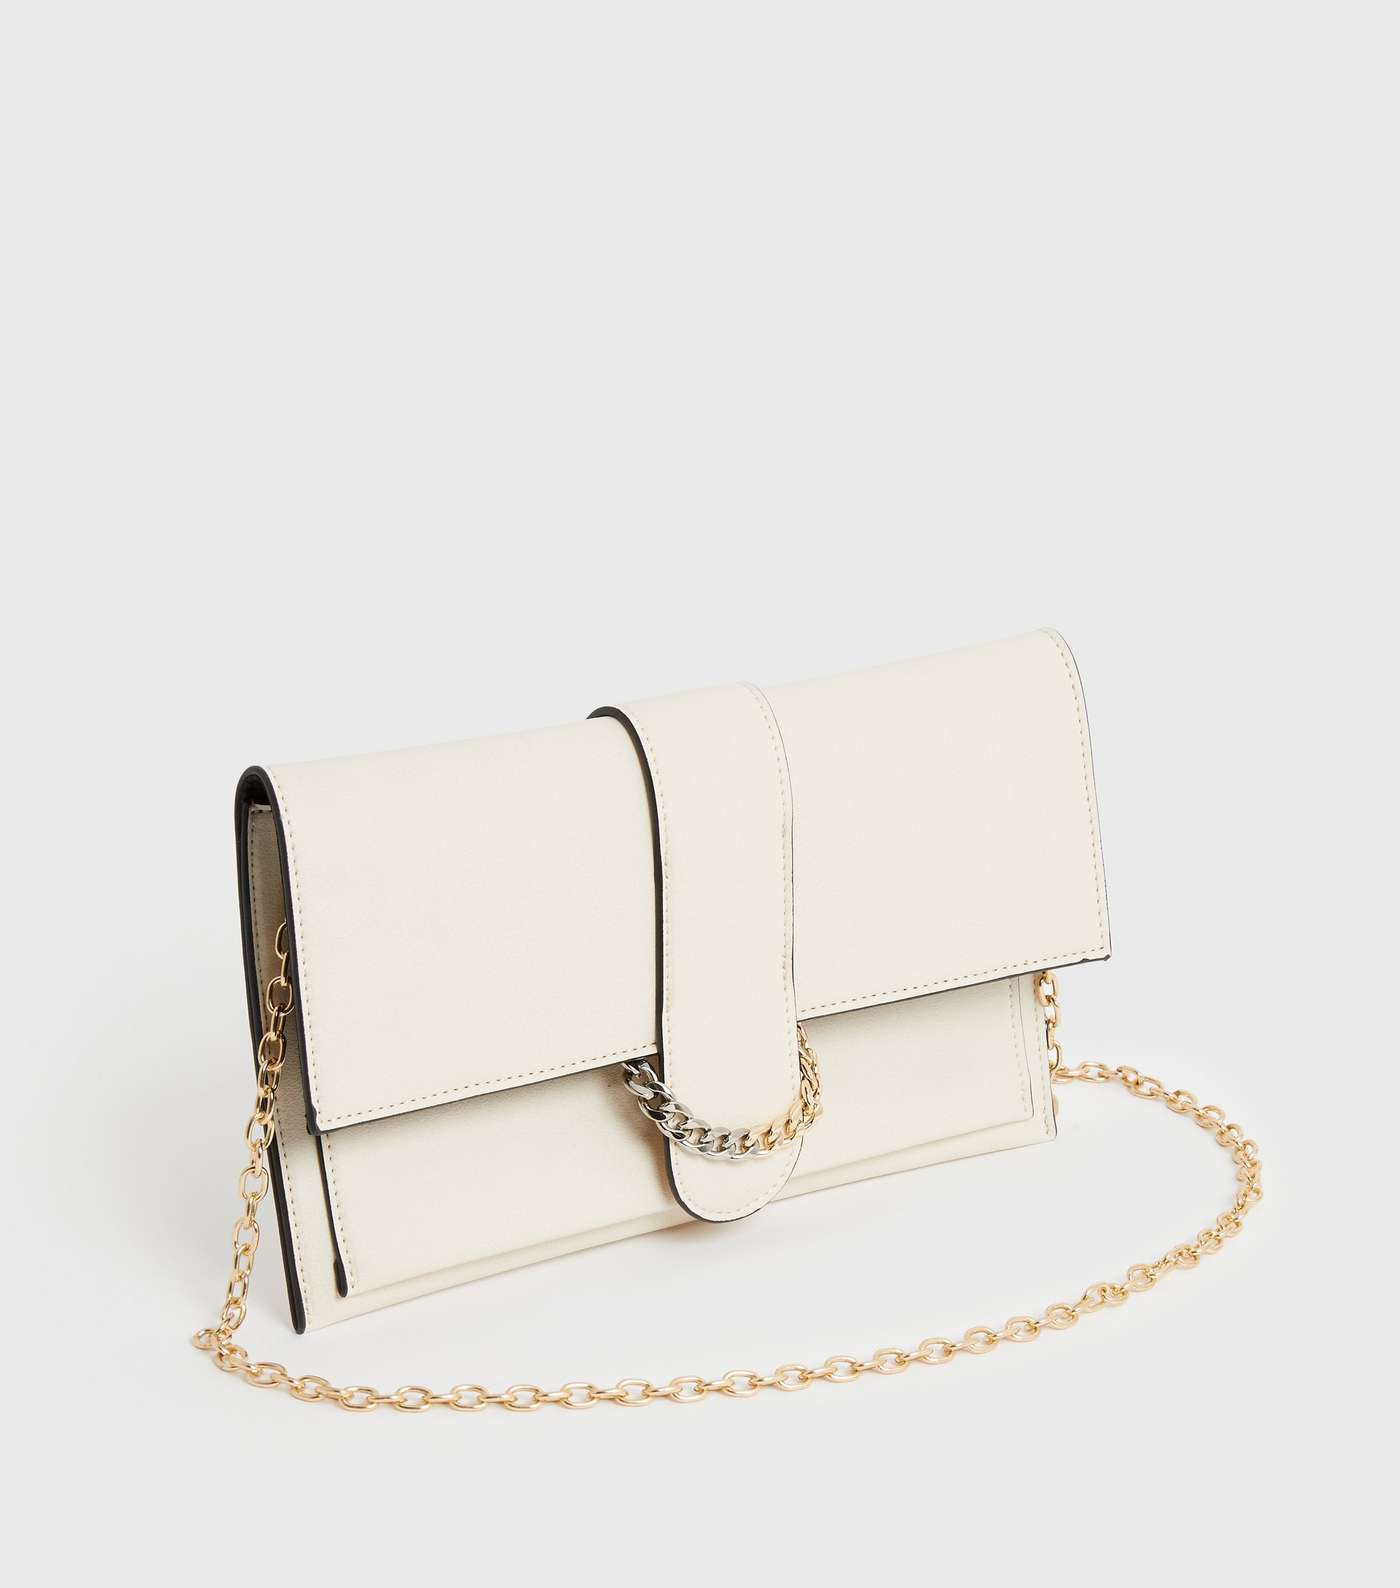 Little Mistress Off White Chain Clutch Bag Image 3